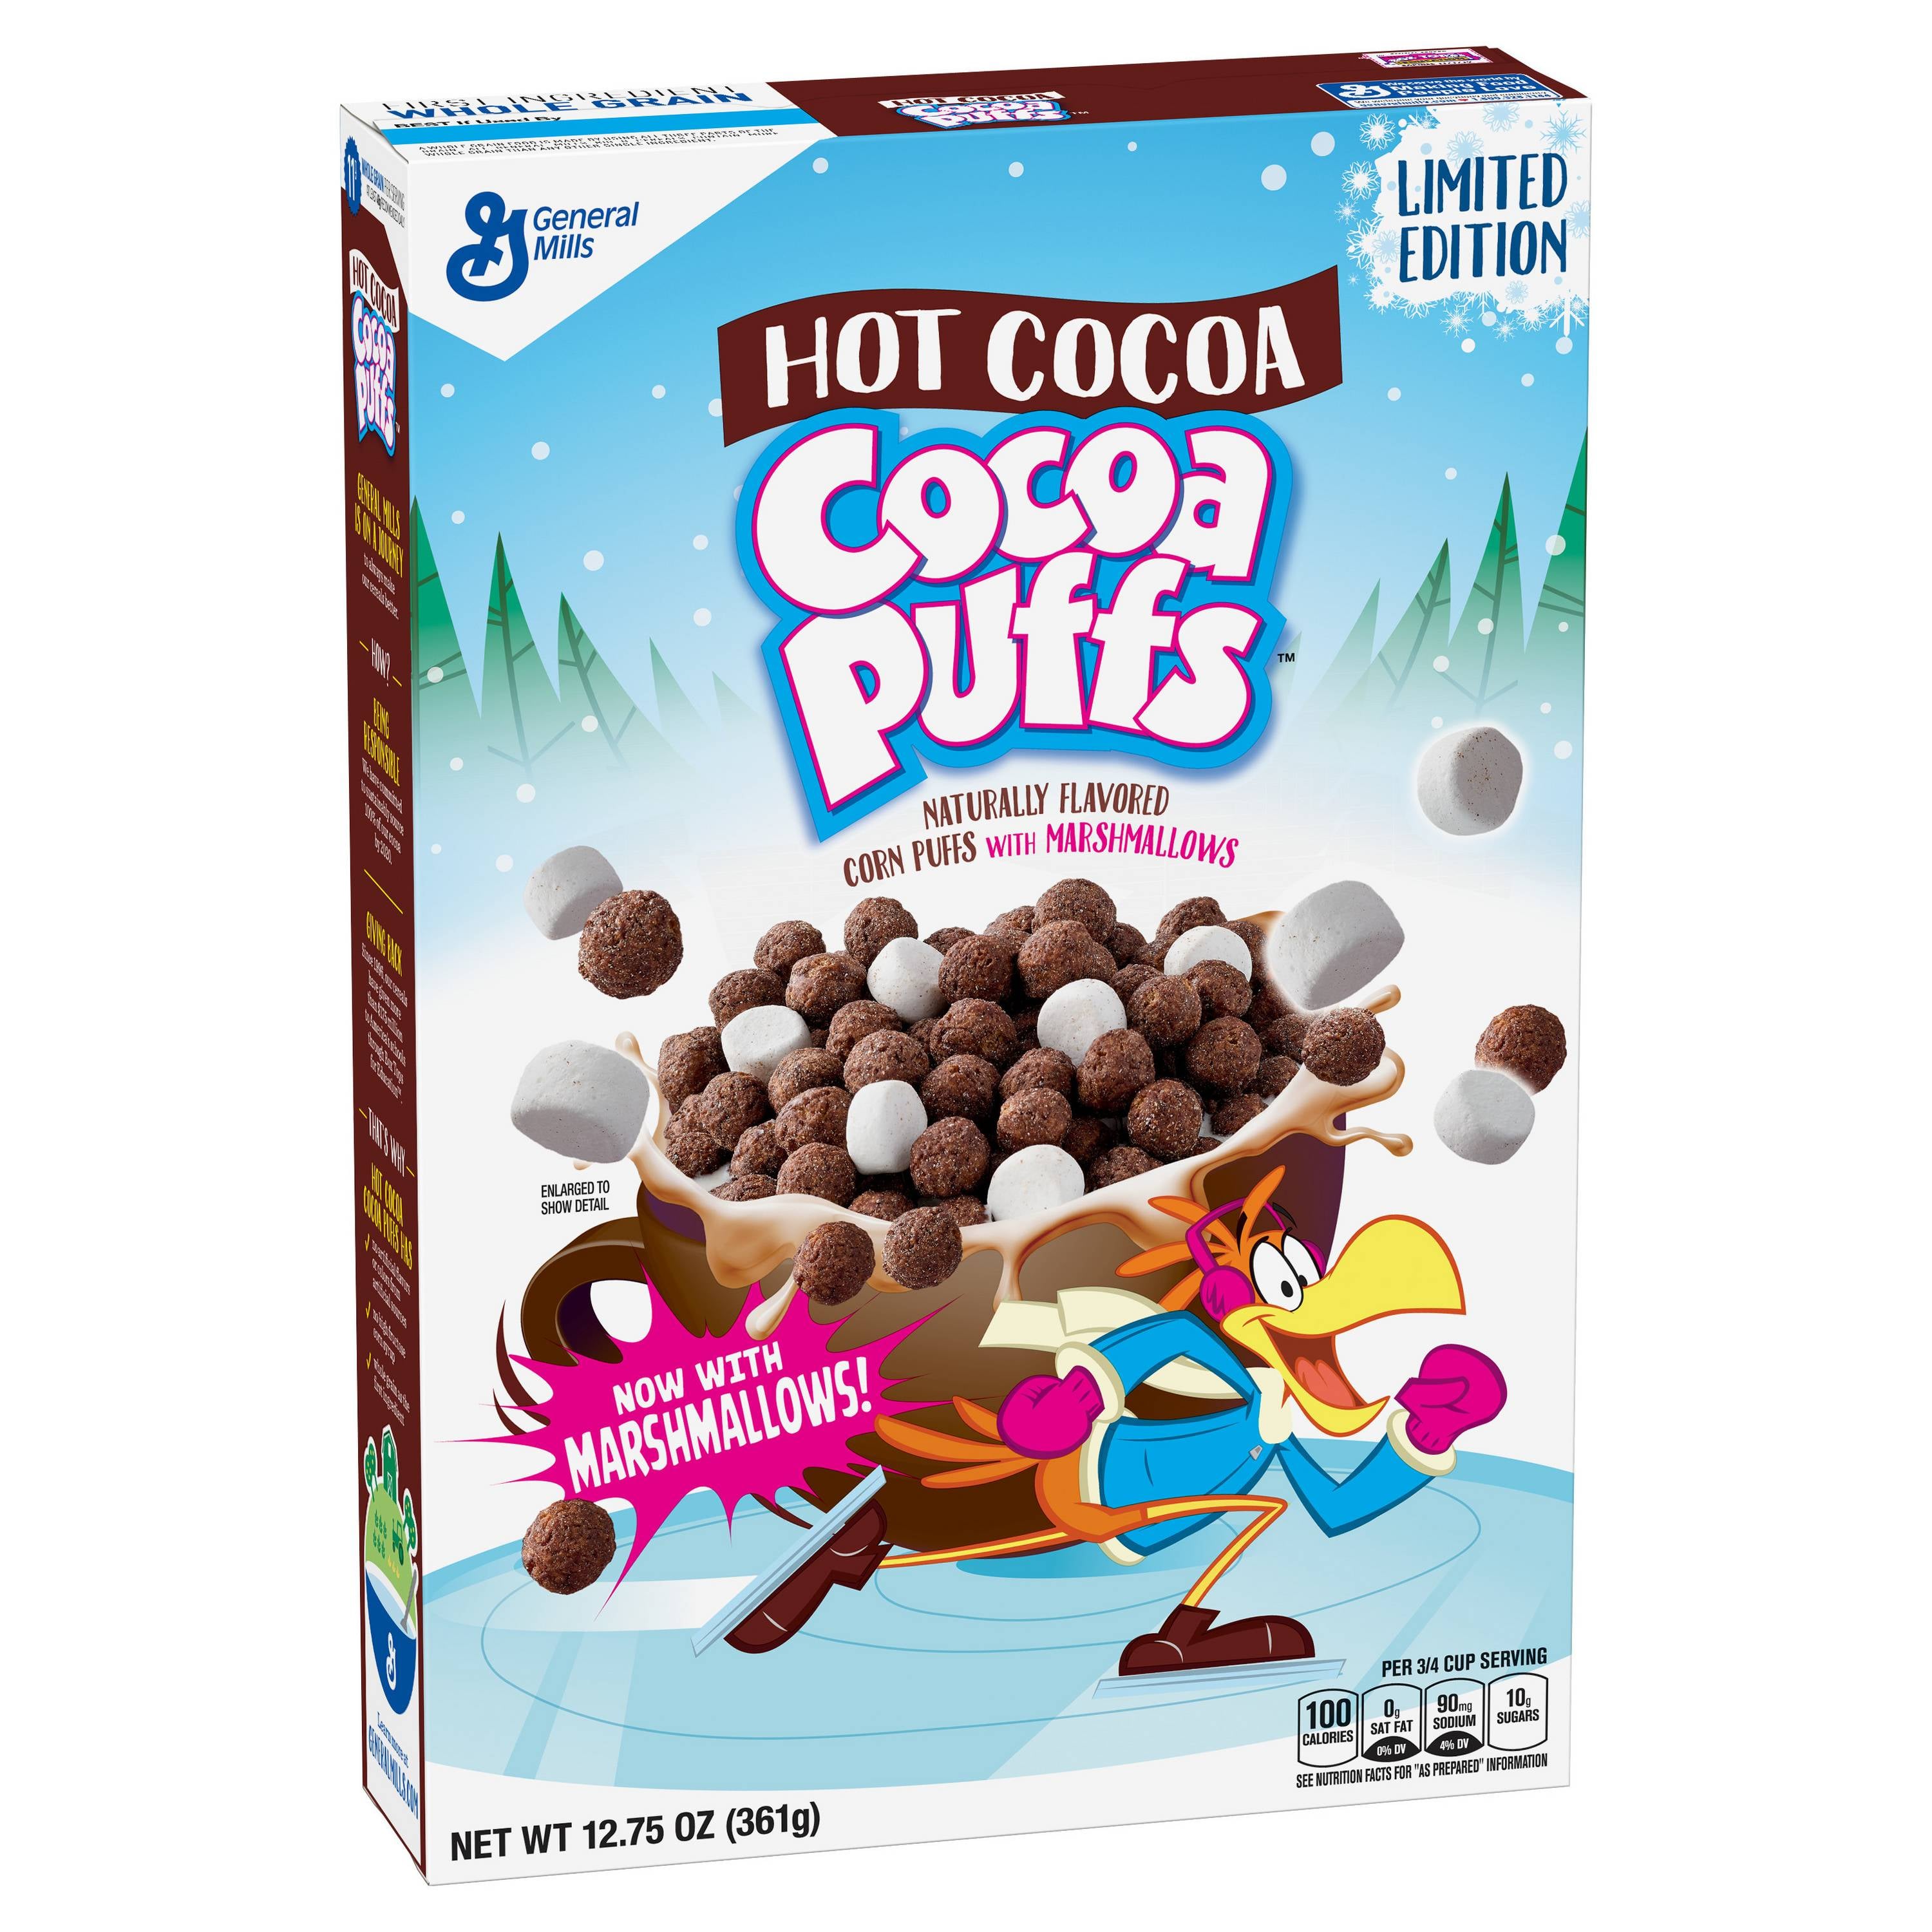 cocoa puffs cereal box cover